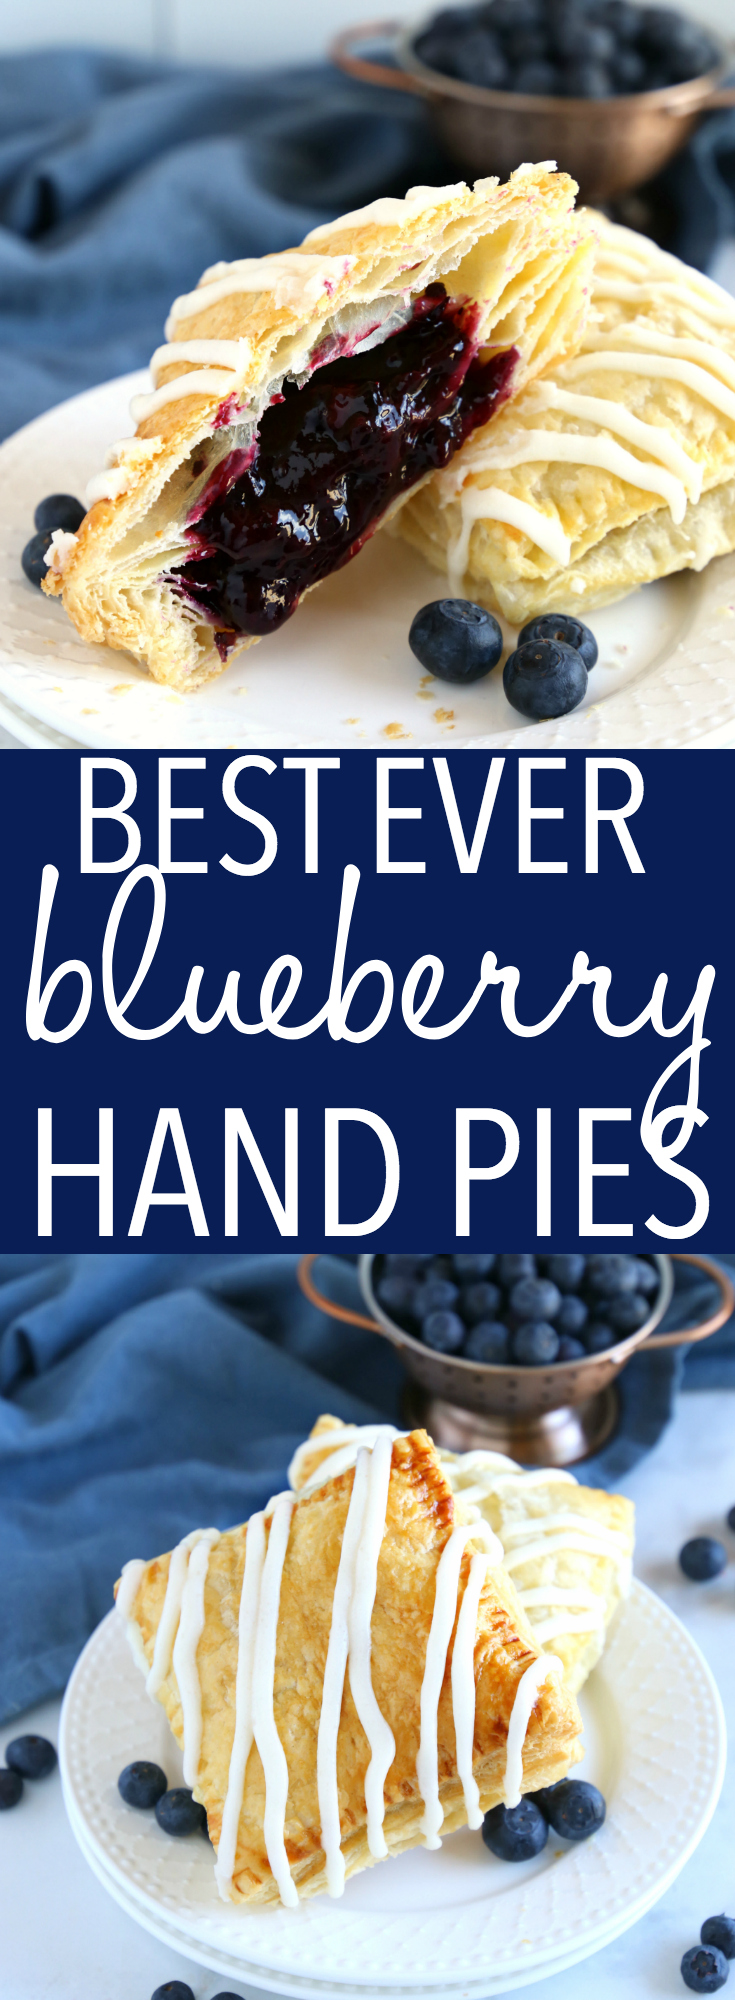 These Best Ever Blueberry Hand Pies are the perfect homemade pastry treat that's great for dessert, brunch, or a snack. They're bursting with fresh blueberries, made with frozen puff pastry and the best sweet glaze! Recipe from thebusybaker.ca! #handpies #pastry #easyrecipe #homemade #blueberry #blueberries #pie #simple #easy #blueberryhandpies #blueberrypie #snack #breakfast #brunch via @busybakerblog